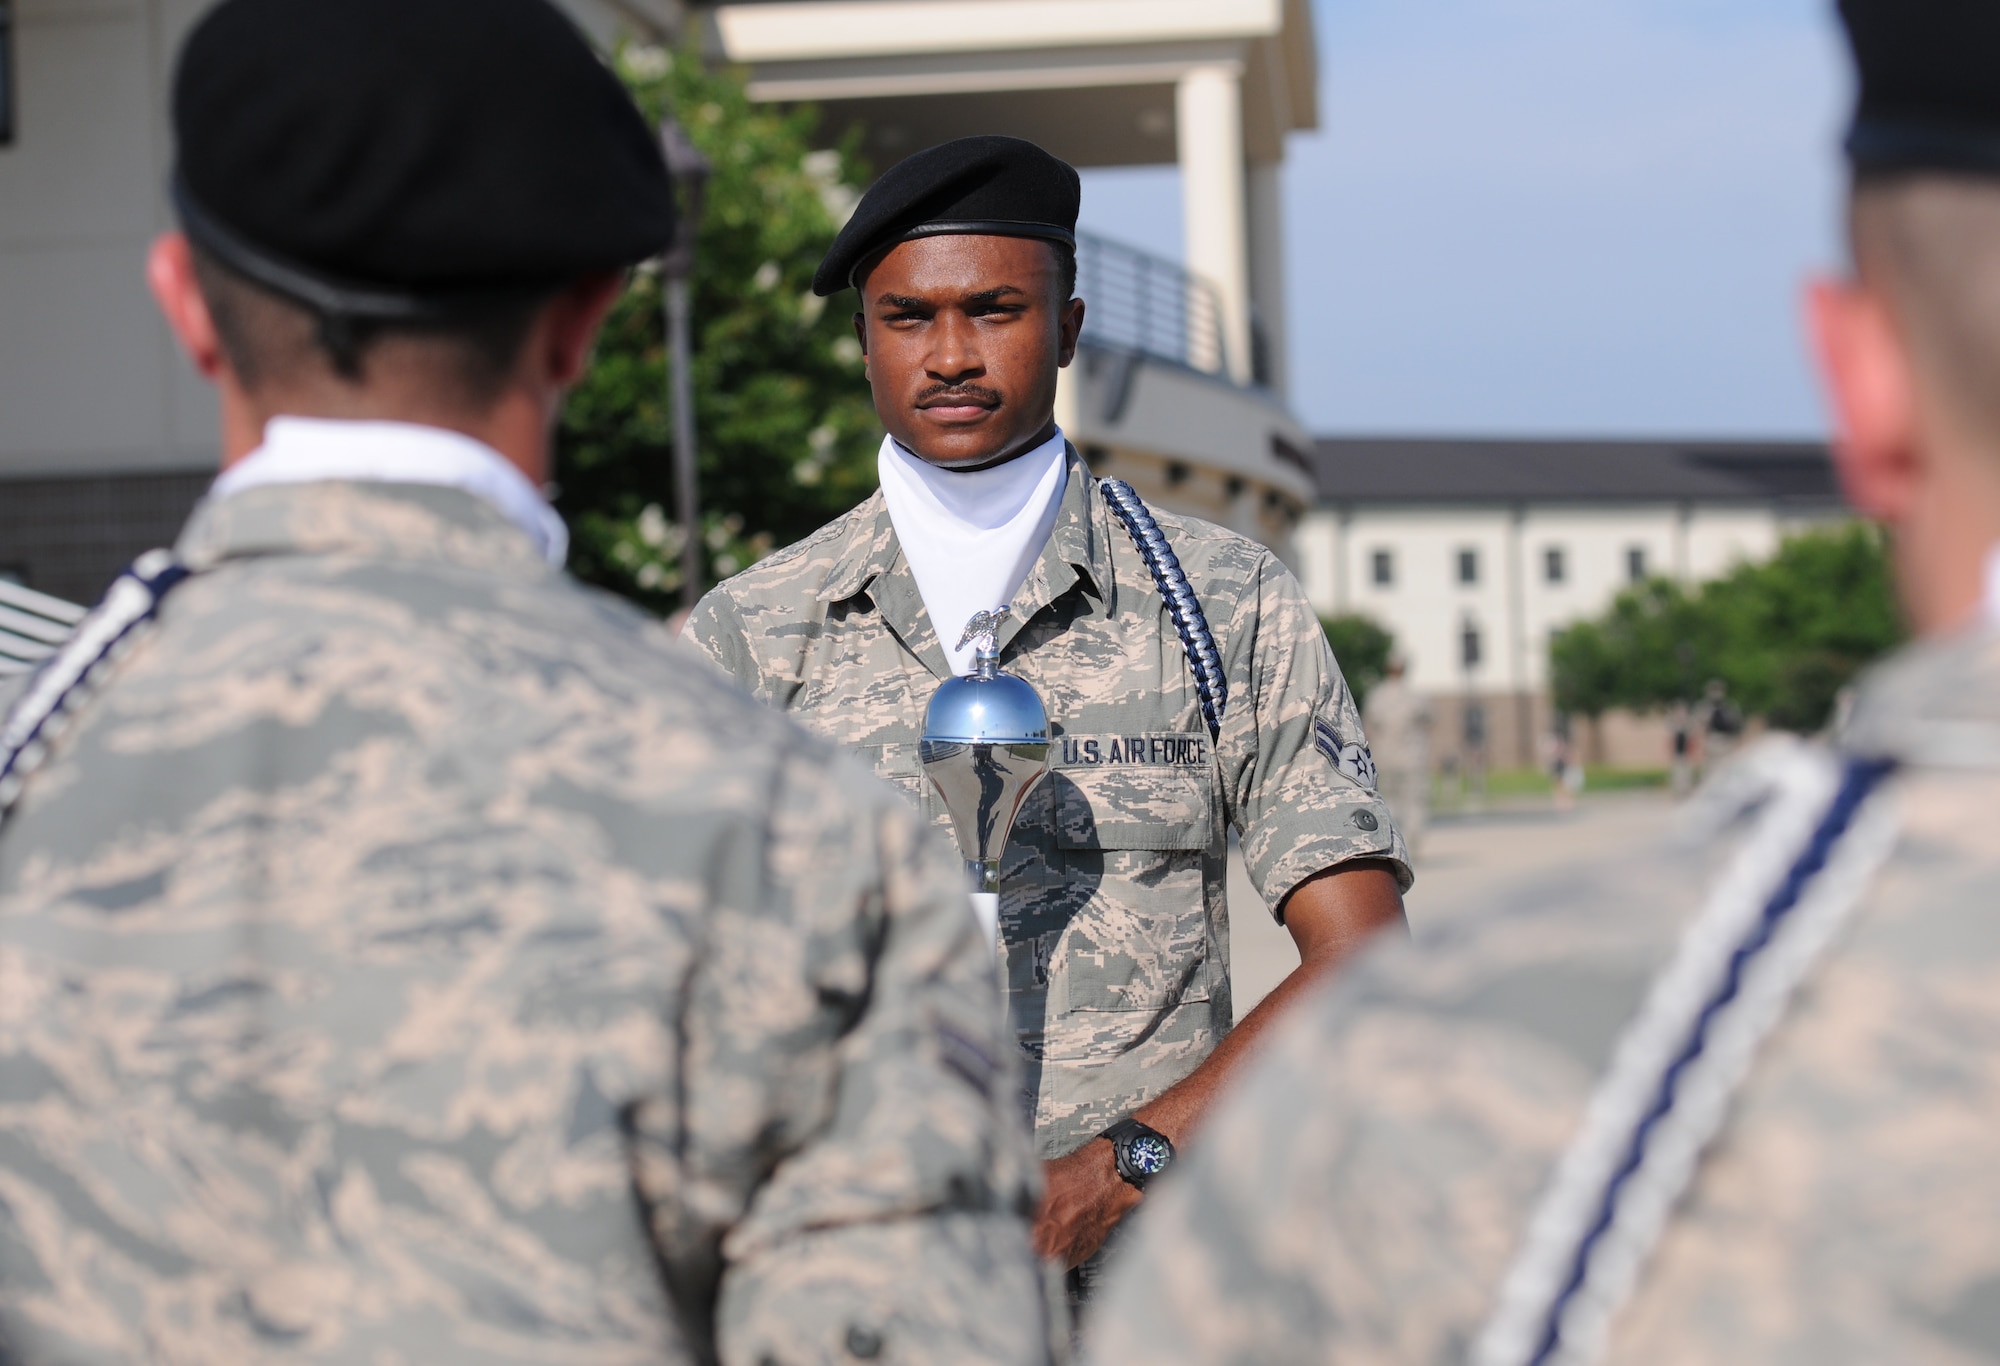 Airman 1st Class Evan Mack, 81st Training Wing Drum and Bugle Corps drum major, leads the band onto the drill pad at the Levitow Training Support Facility during a practice session May 31, 2016, Keesler Air Force Base, Miss. The drum and bugle corps performs at various events such as 81st Training Group student parades and drill downs in addition to attending Air Force specialty code technical training on a daily basis. (U.S. Air Force photo by Kemberly Groue)